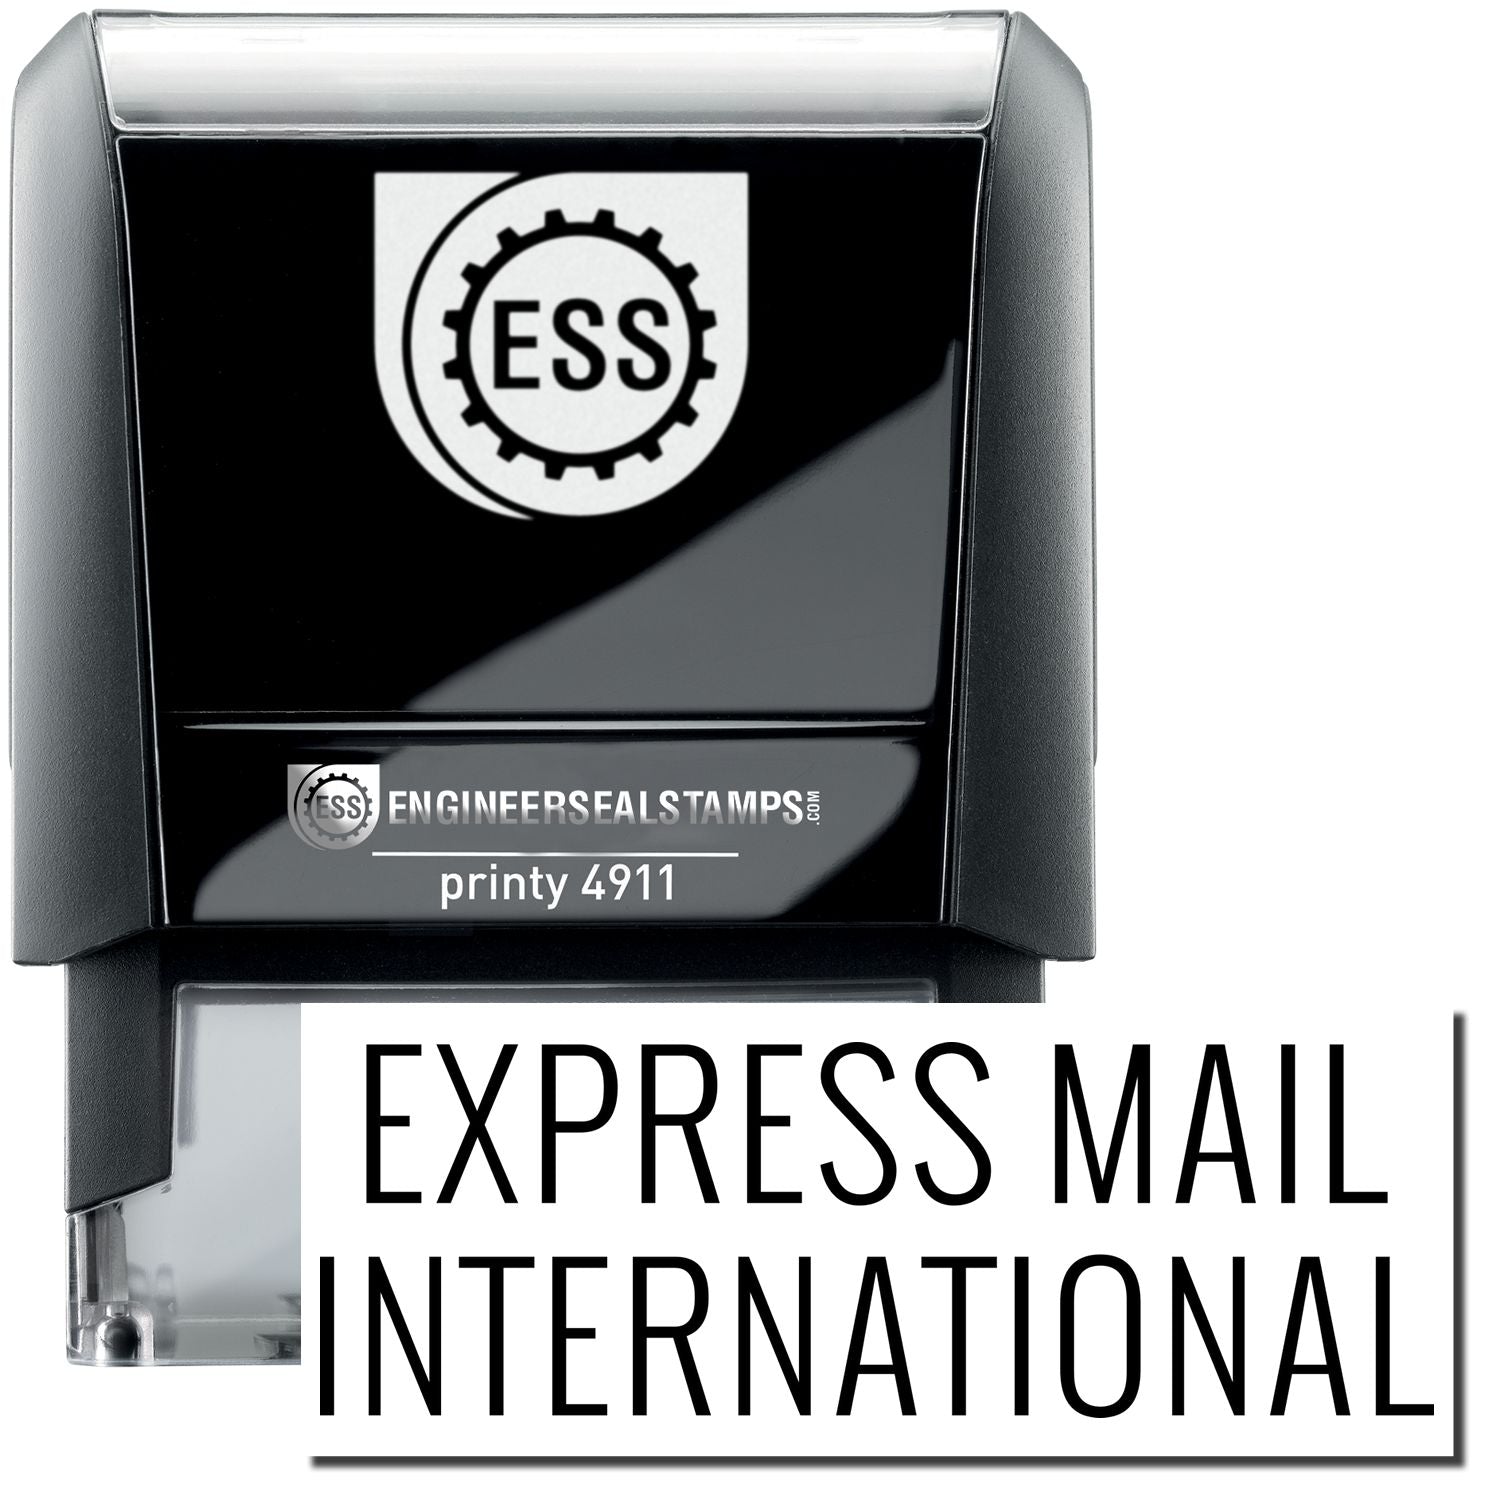 A self-inking stamp with a stamped image showing how the text "EXPRESS MAIL INTERNATIONAL" is displayed after stamping.